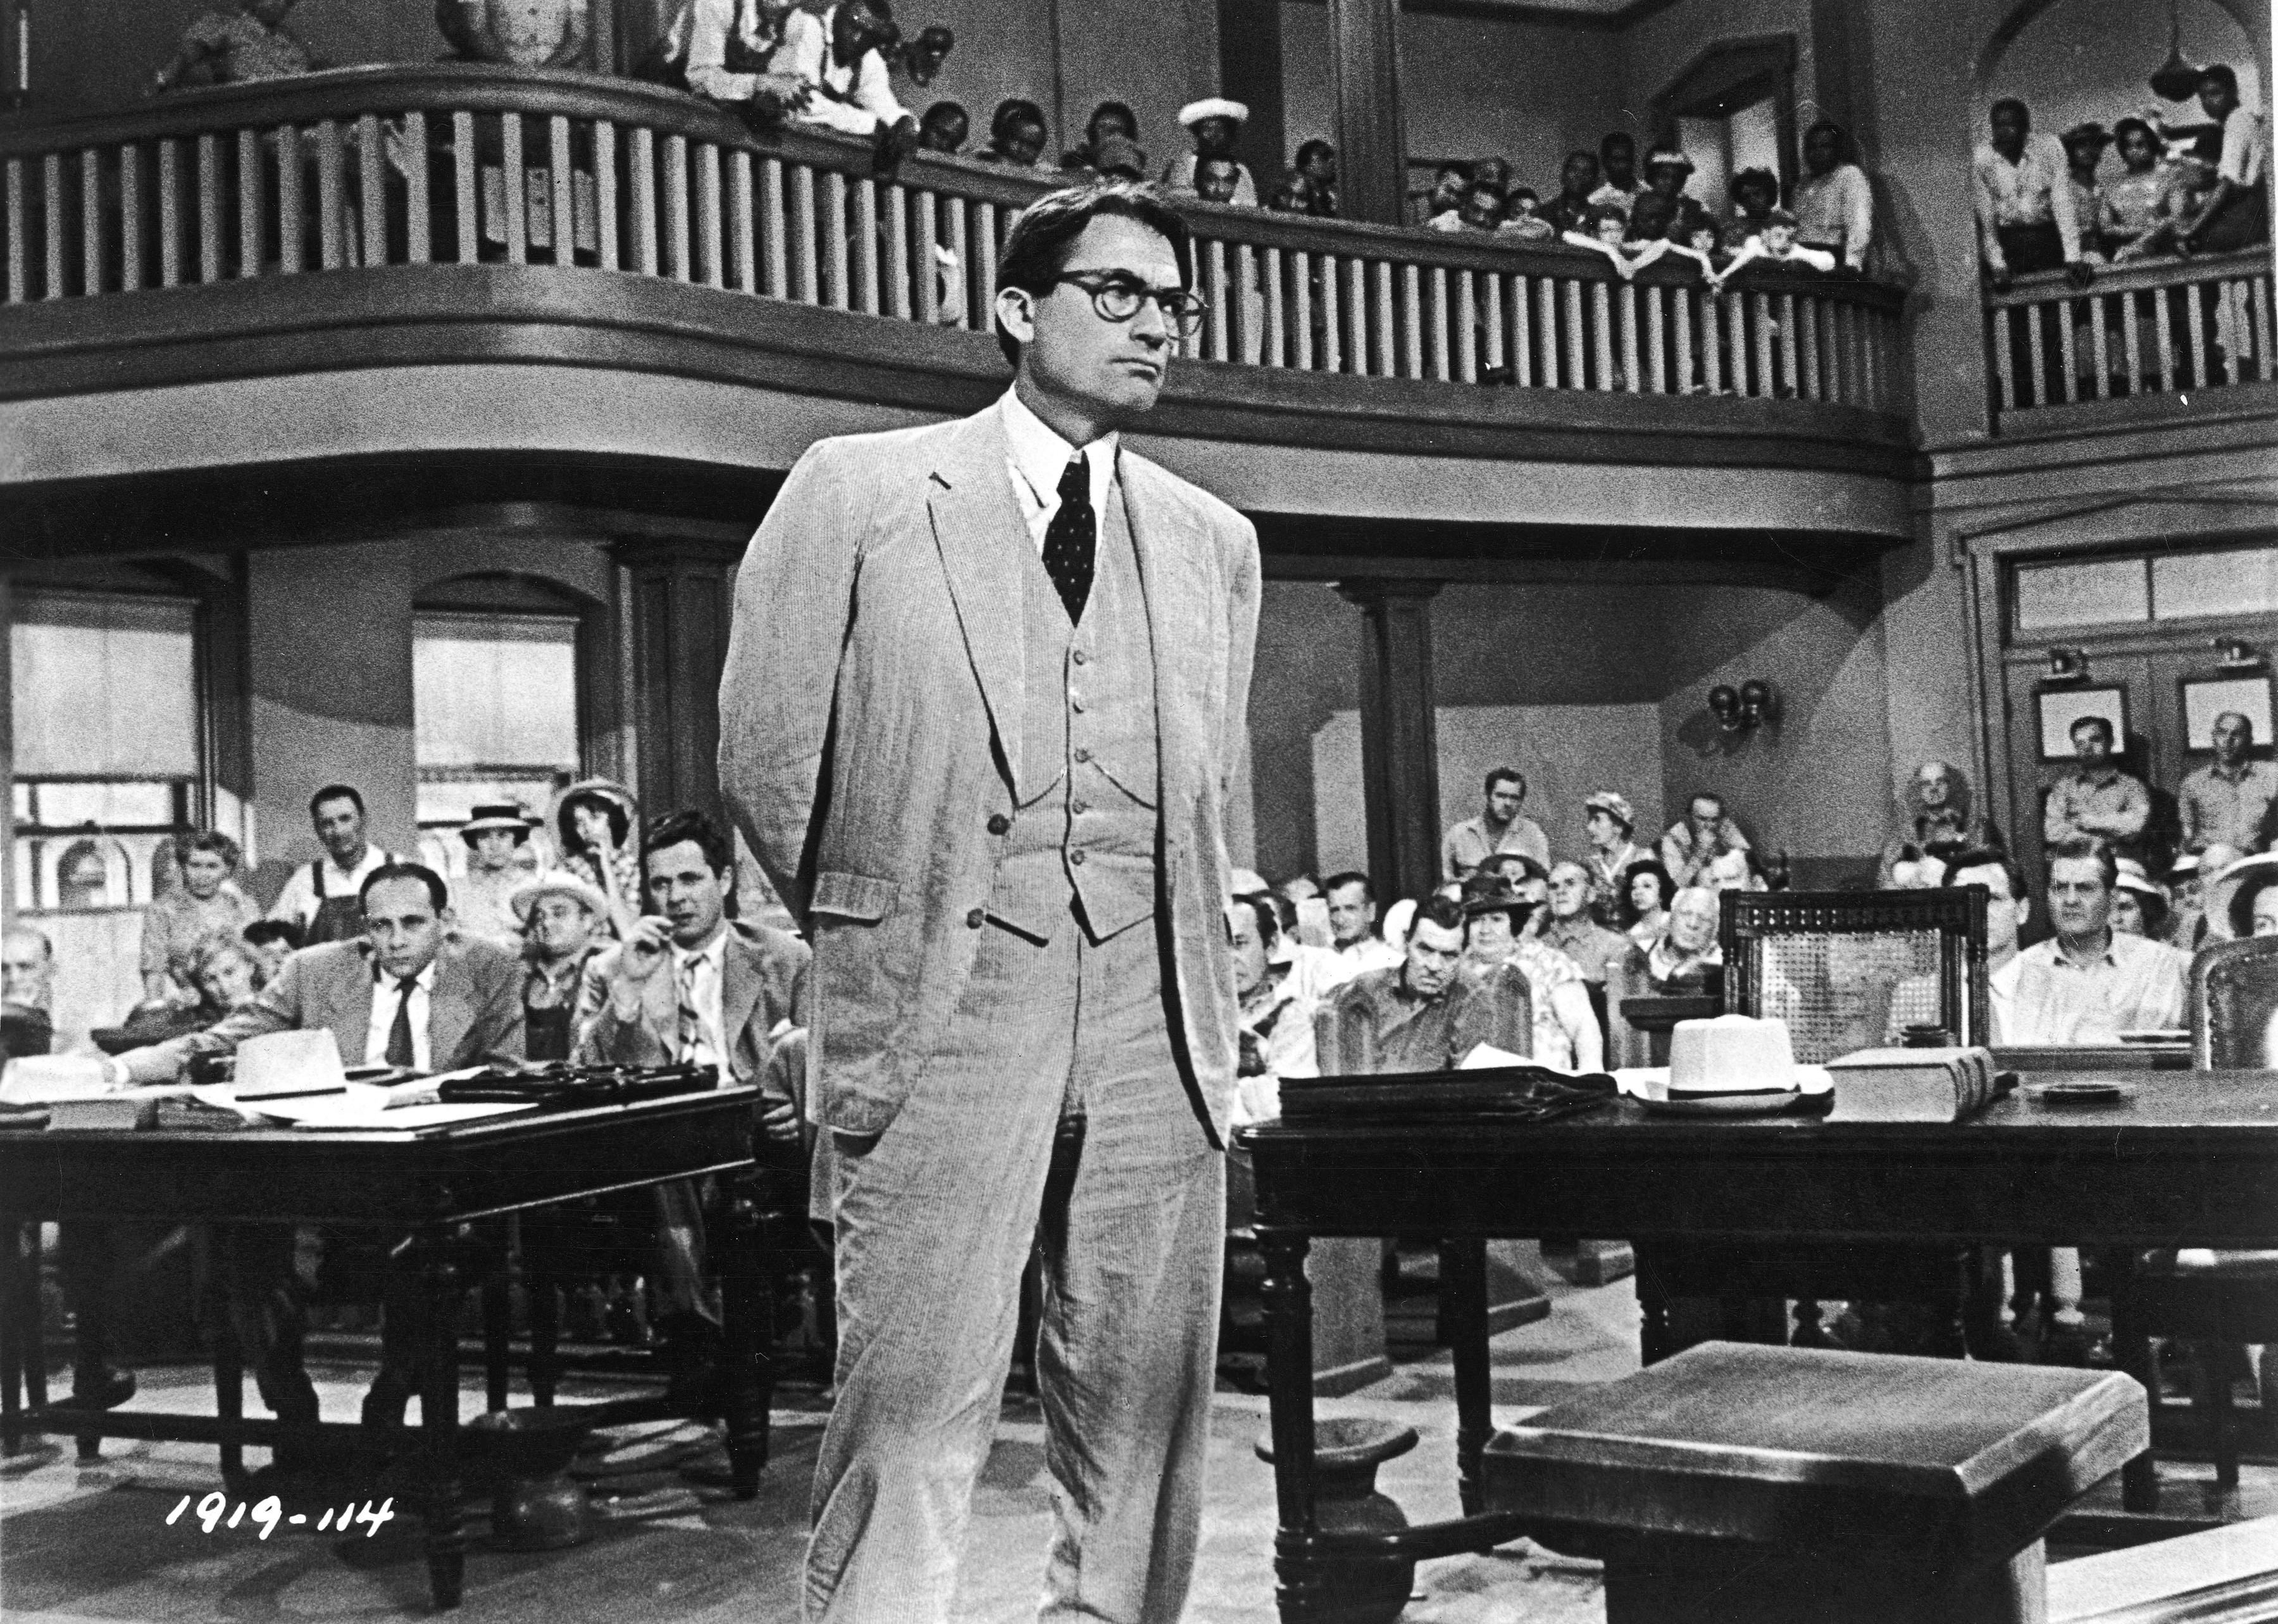 Gregory Peck, as Atticus Finch, stands in a courtroom in a scene from To Kill A Mockingbird.